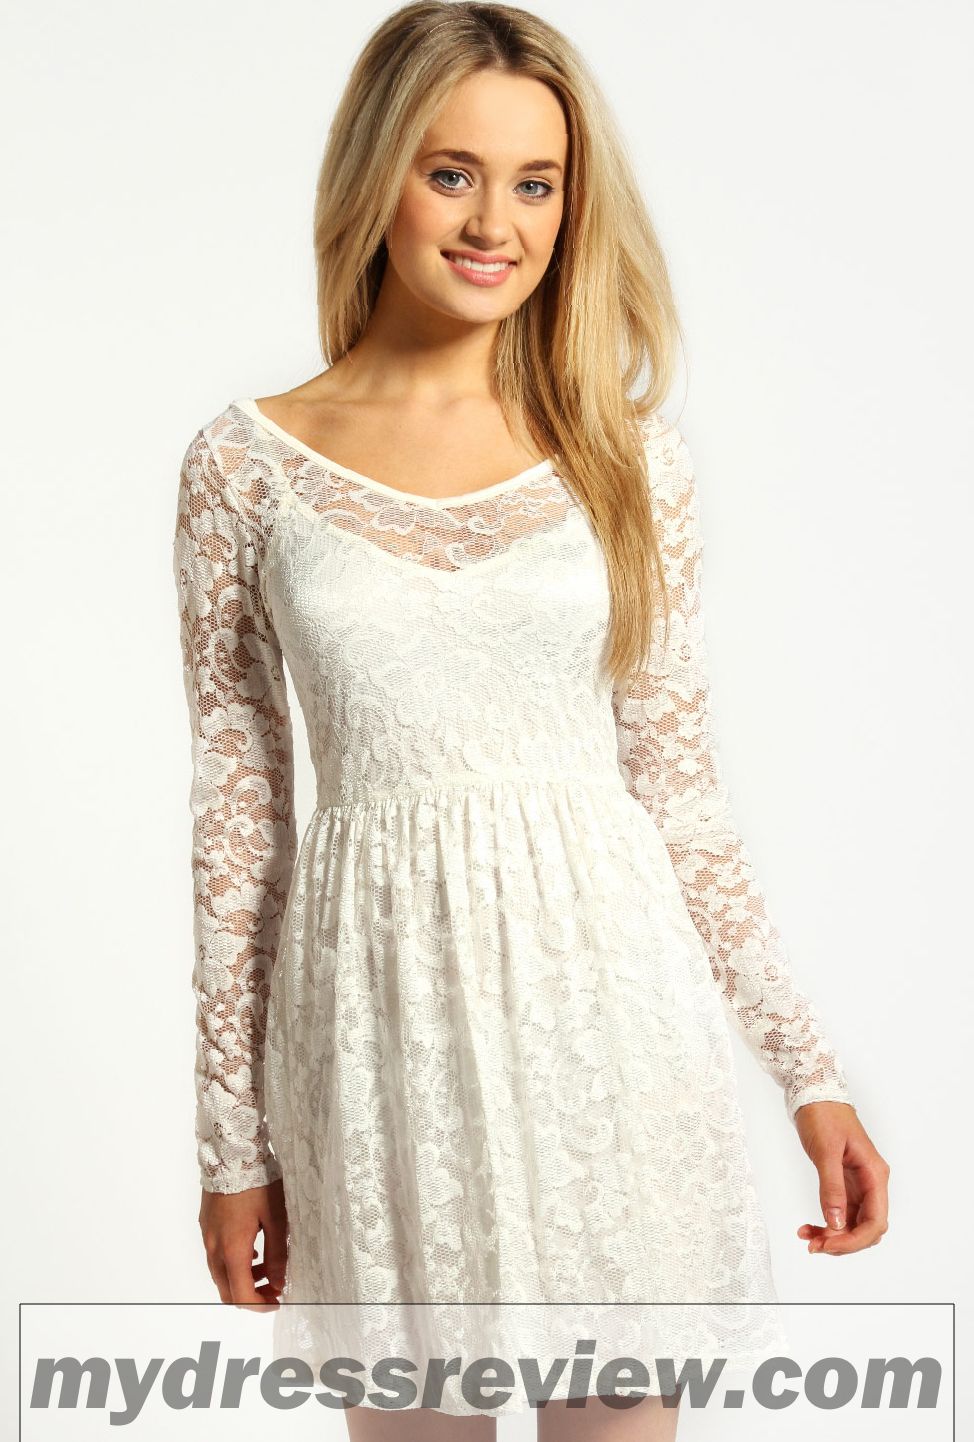 White Sleeve Lace Dress & 2017 Fashion Trends